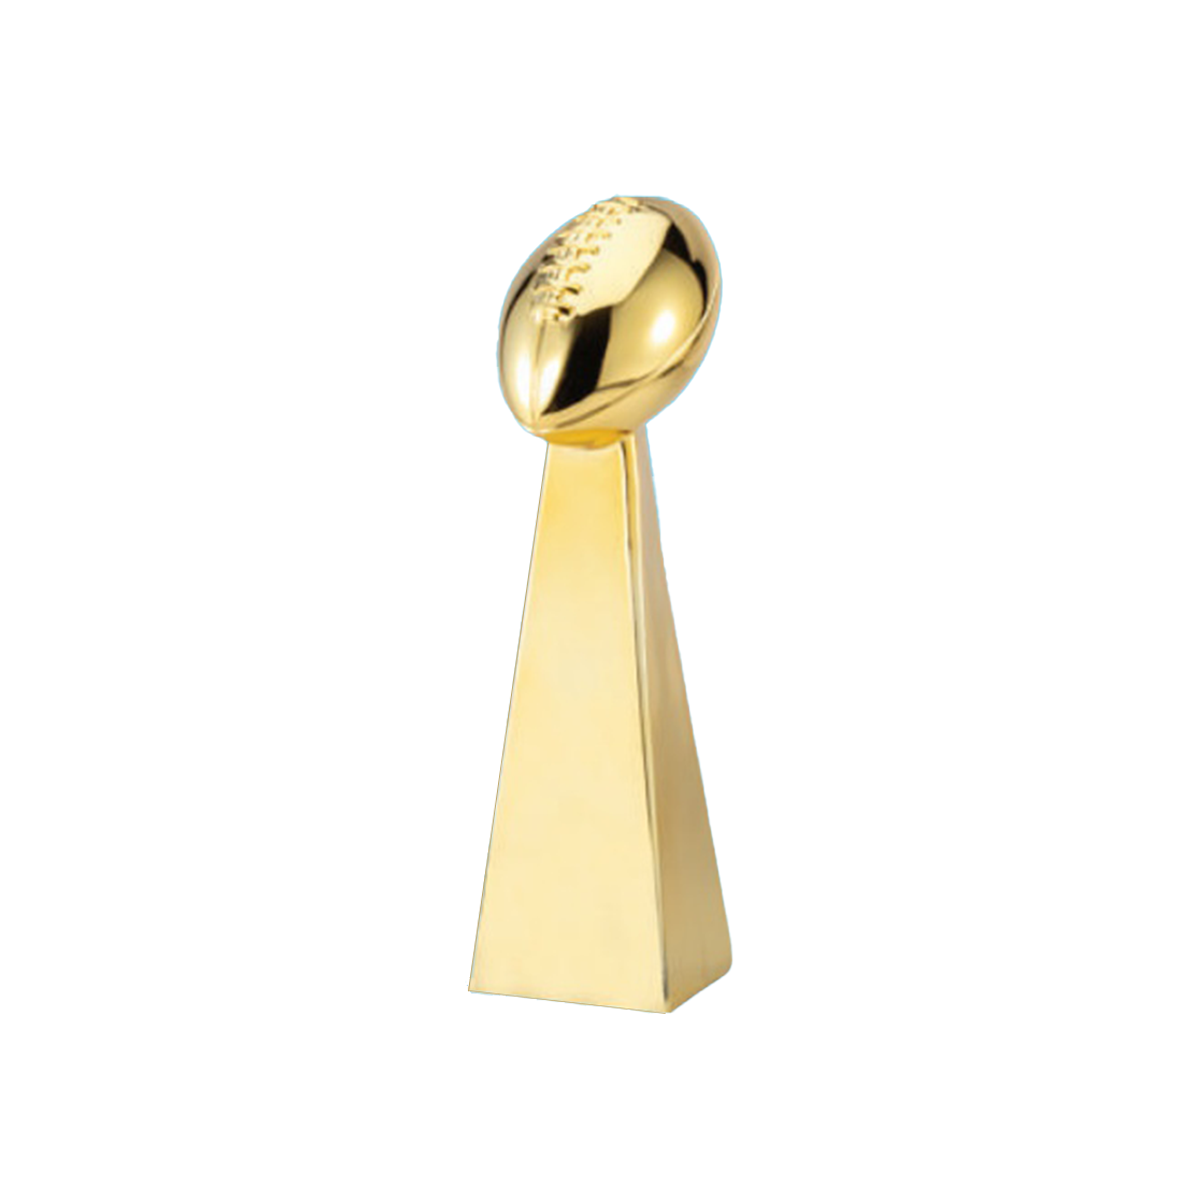 Football Tower Trophy in Gold Finish